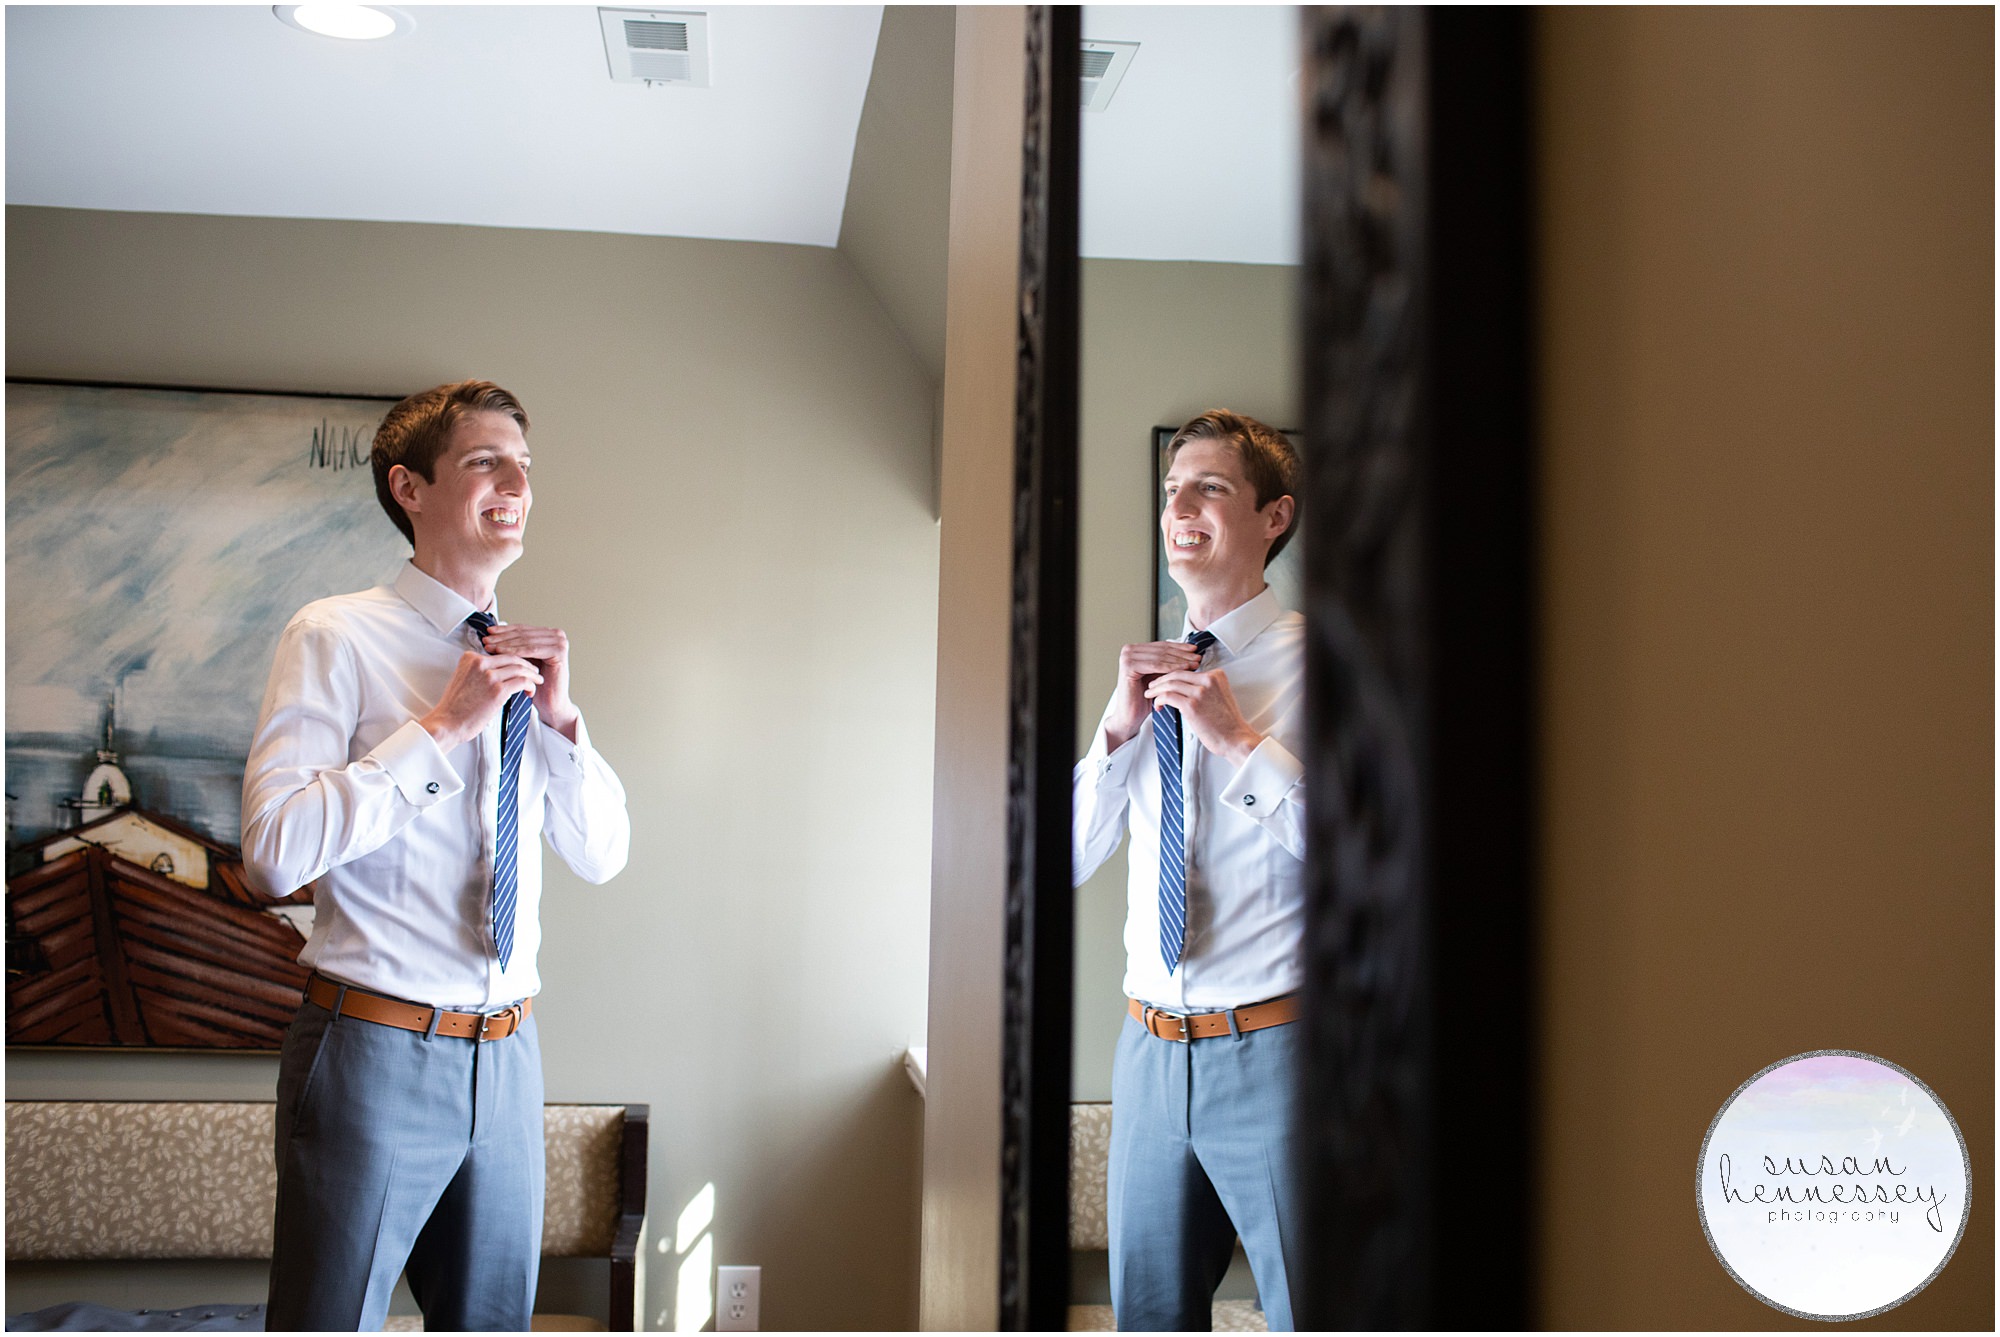 Susan Hennessey Photography Best of 2020 Weddings - The Community House of Moorestown groom gets dressed